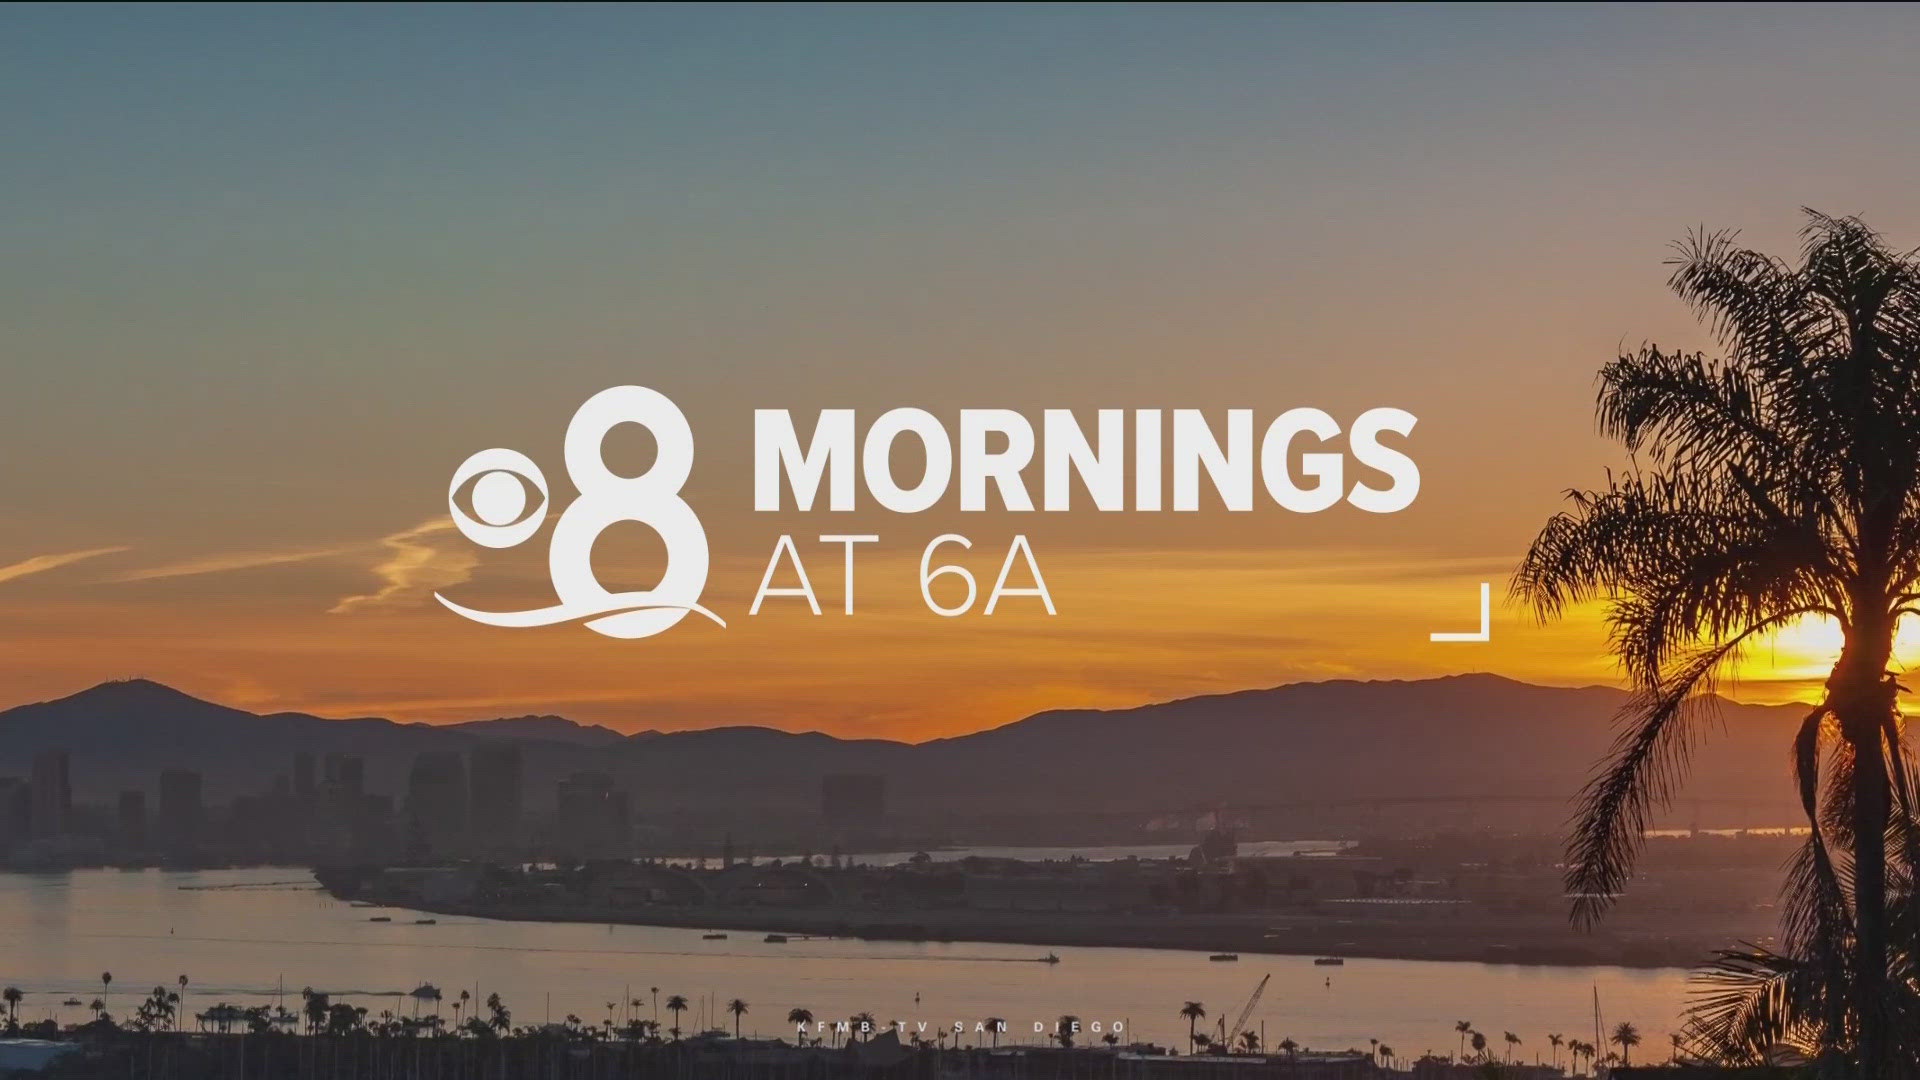 Here are the top stories around San Diego County for the morning of Friday, June 28th.
For the latest news, weather and sports, head to:
https://www.cbs8.com/